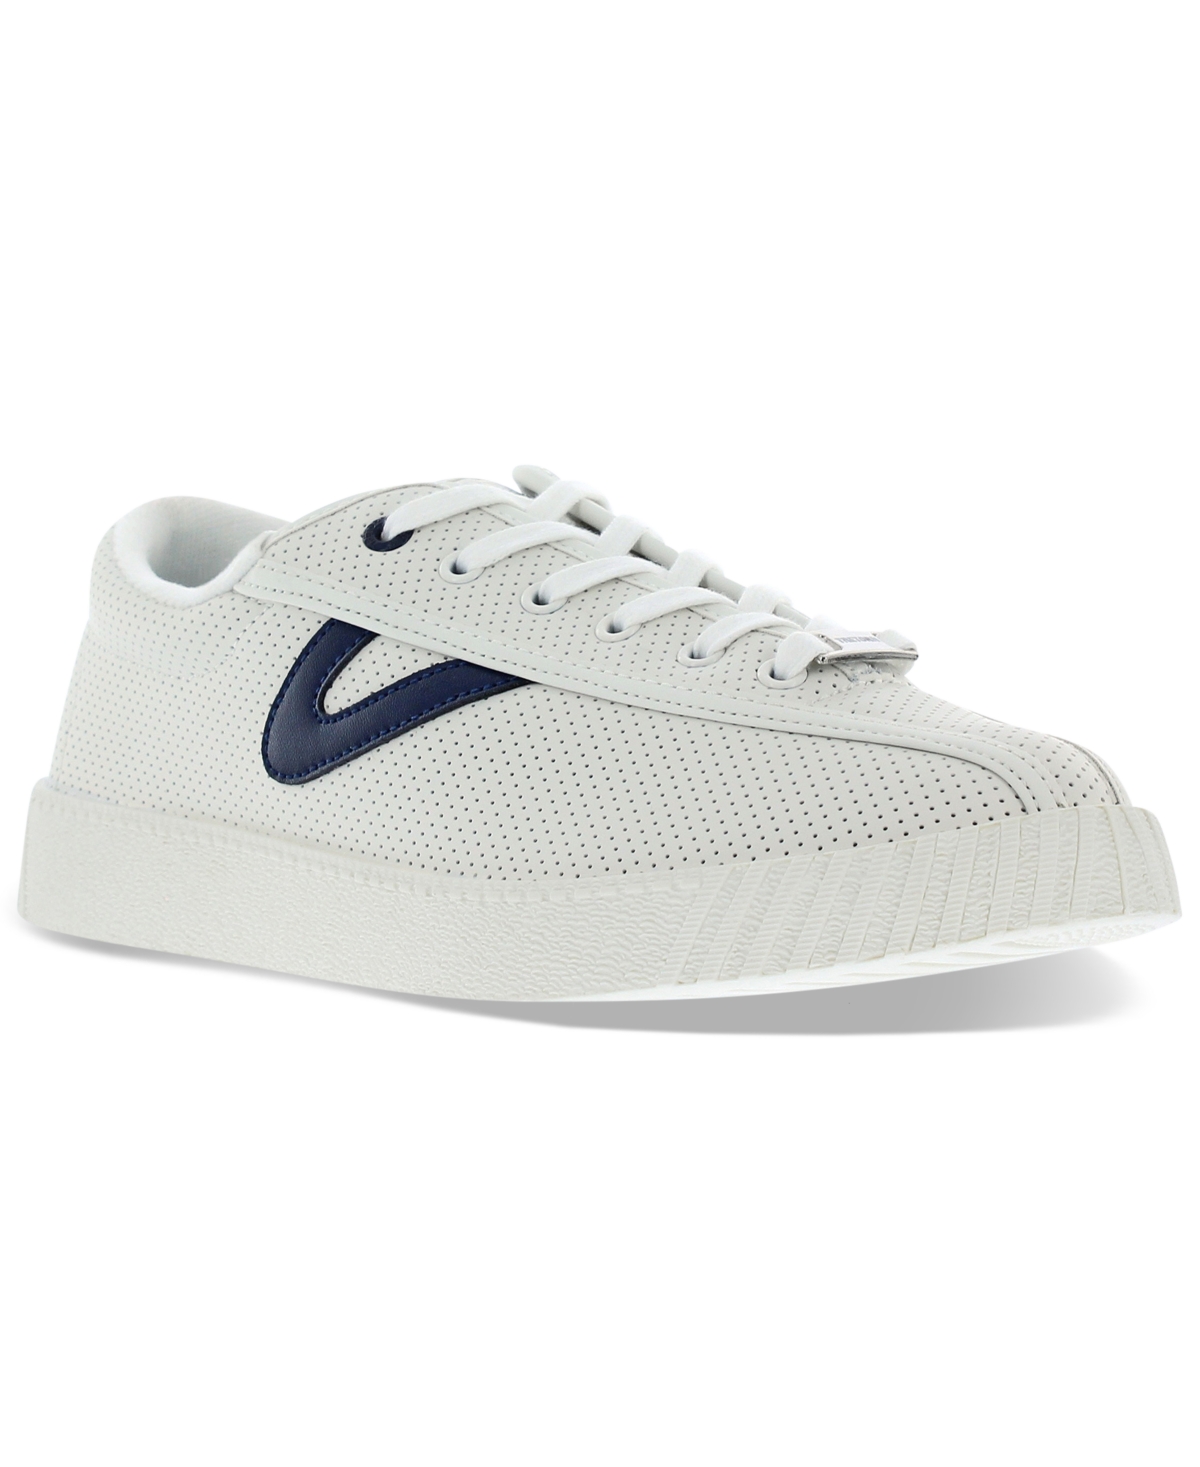 Men's Nylite Plus Elite Perforated Leather Casual Sneakers from Finish Line - White/navy